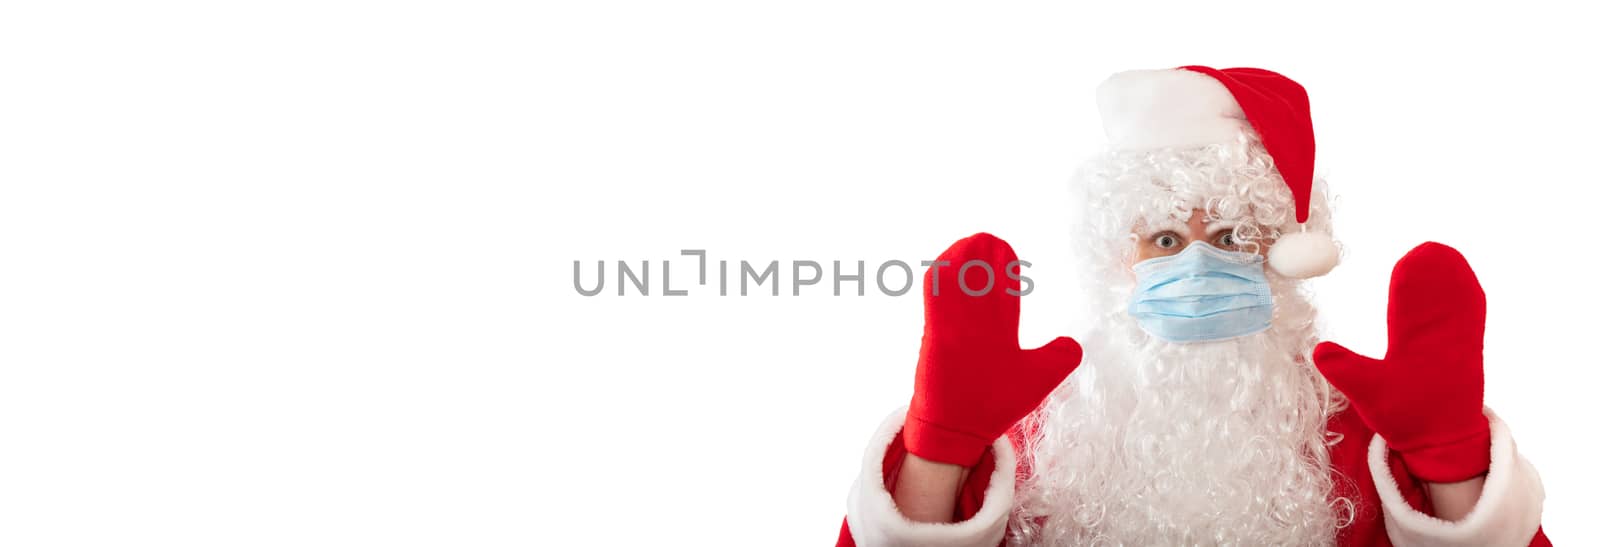 View of a man wearing Santa Claus costume, medical mask, having his both hands up, eyes wide open in warning gesture, isolated on white background. Banner size, copy space. Pandemic holiday concept by DamantisZ